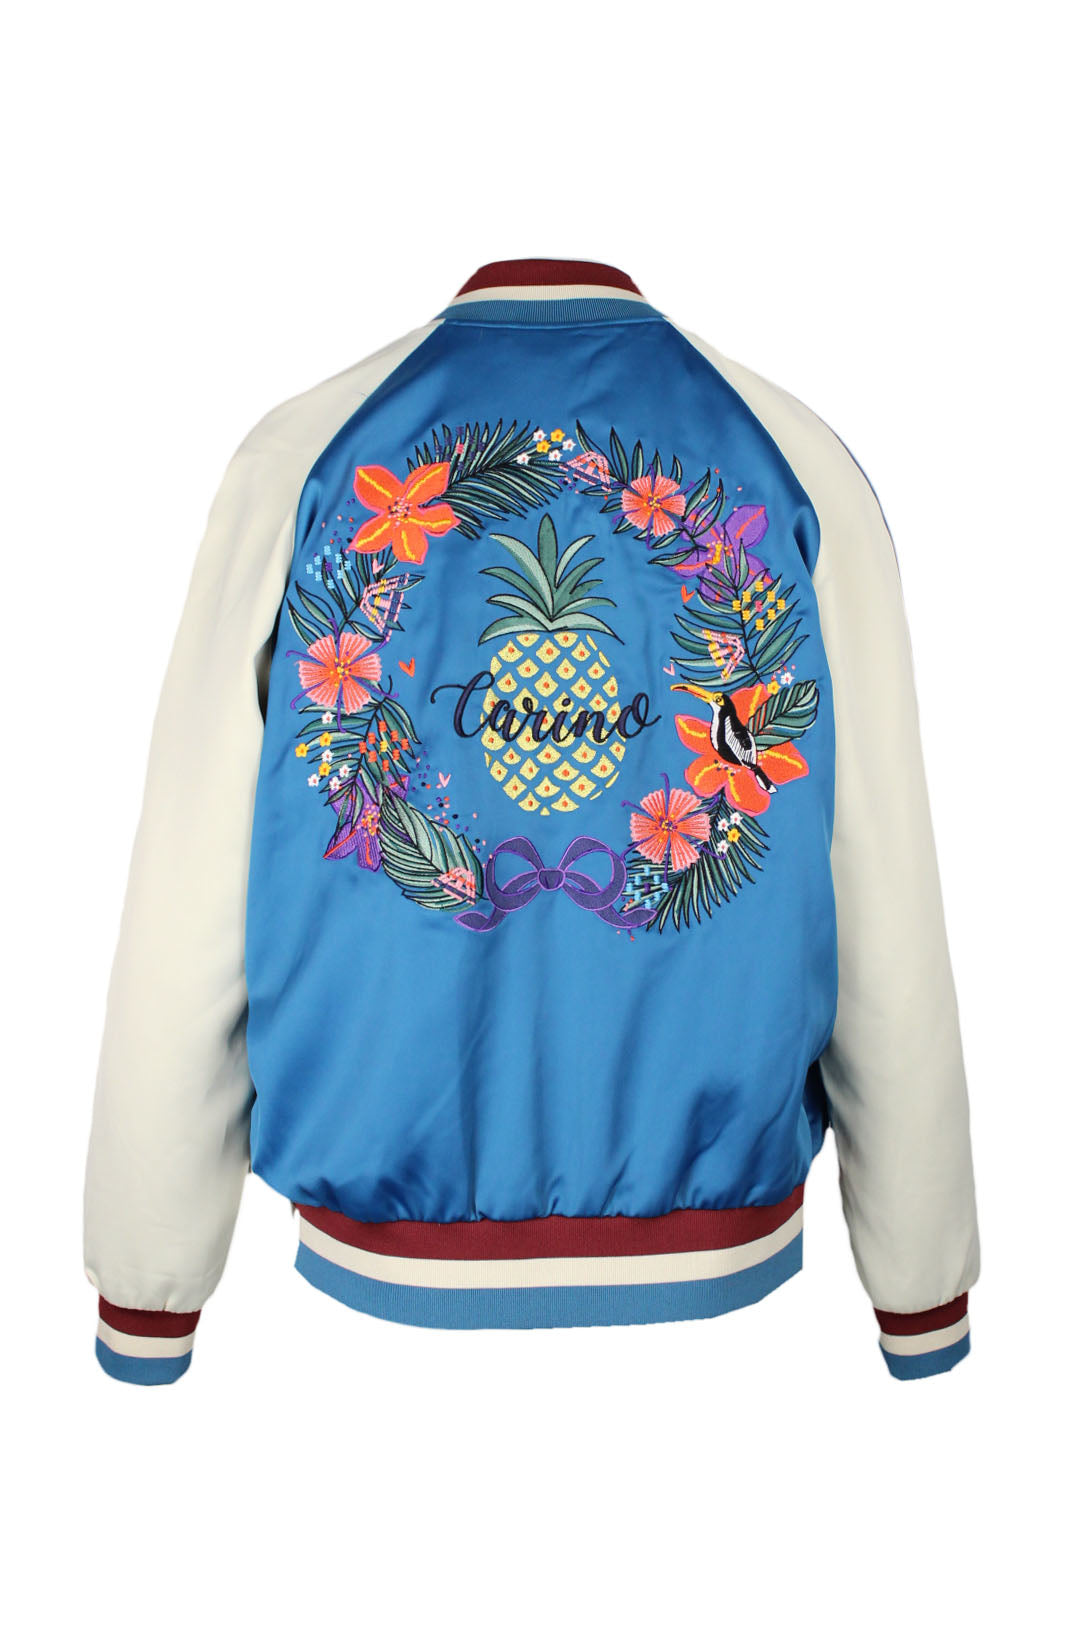 back of jacket. showing floral tropical embroidery and carino cursive type.